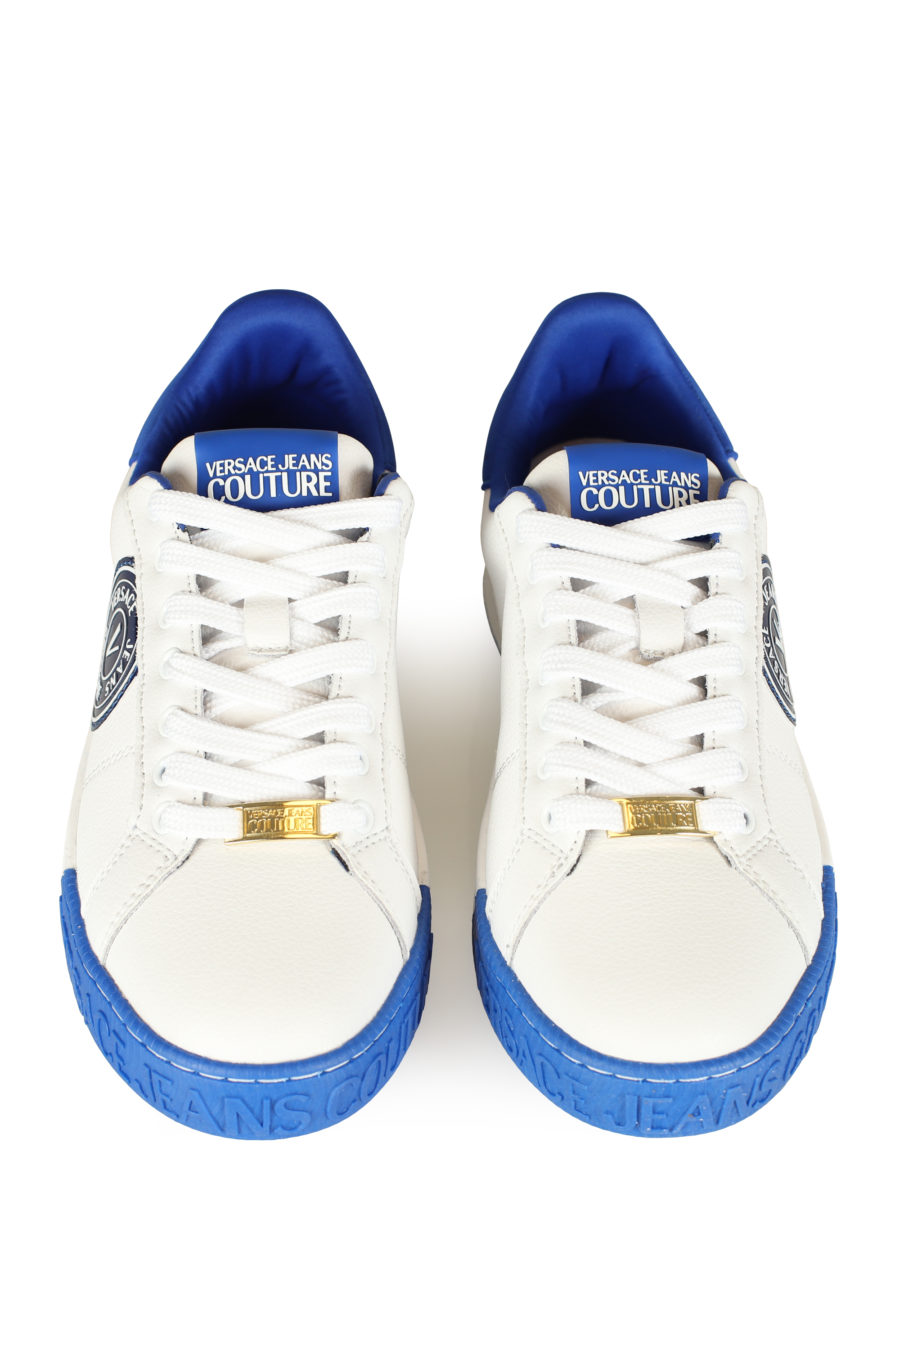 White trainers with blue details - IMG 3443